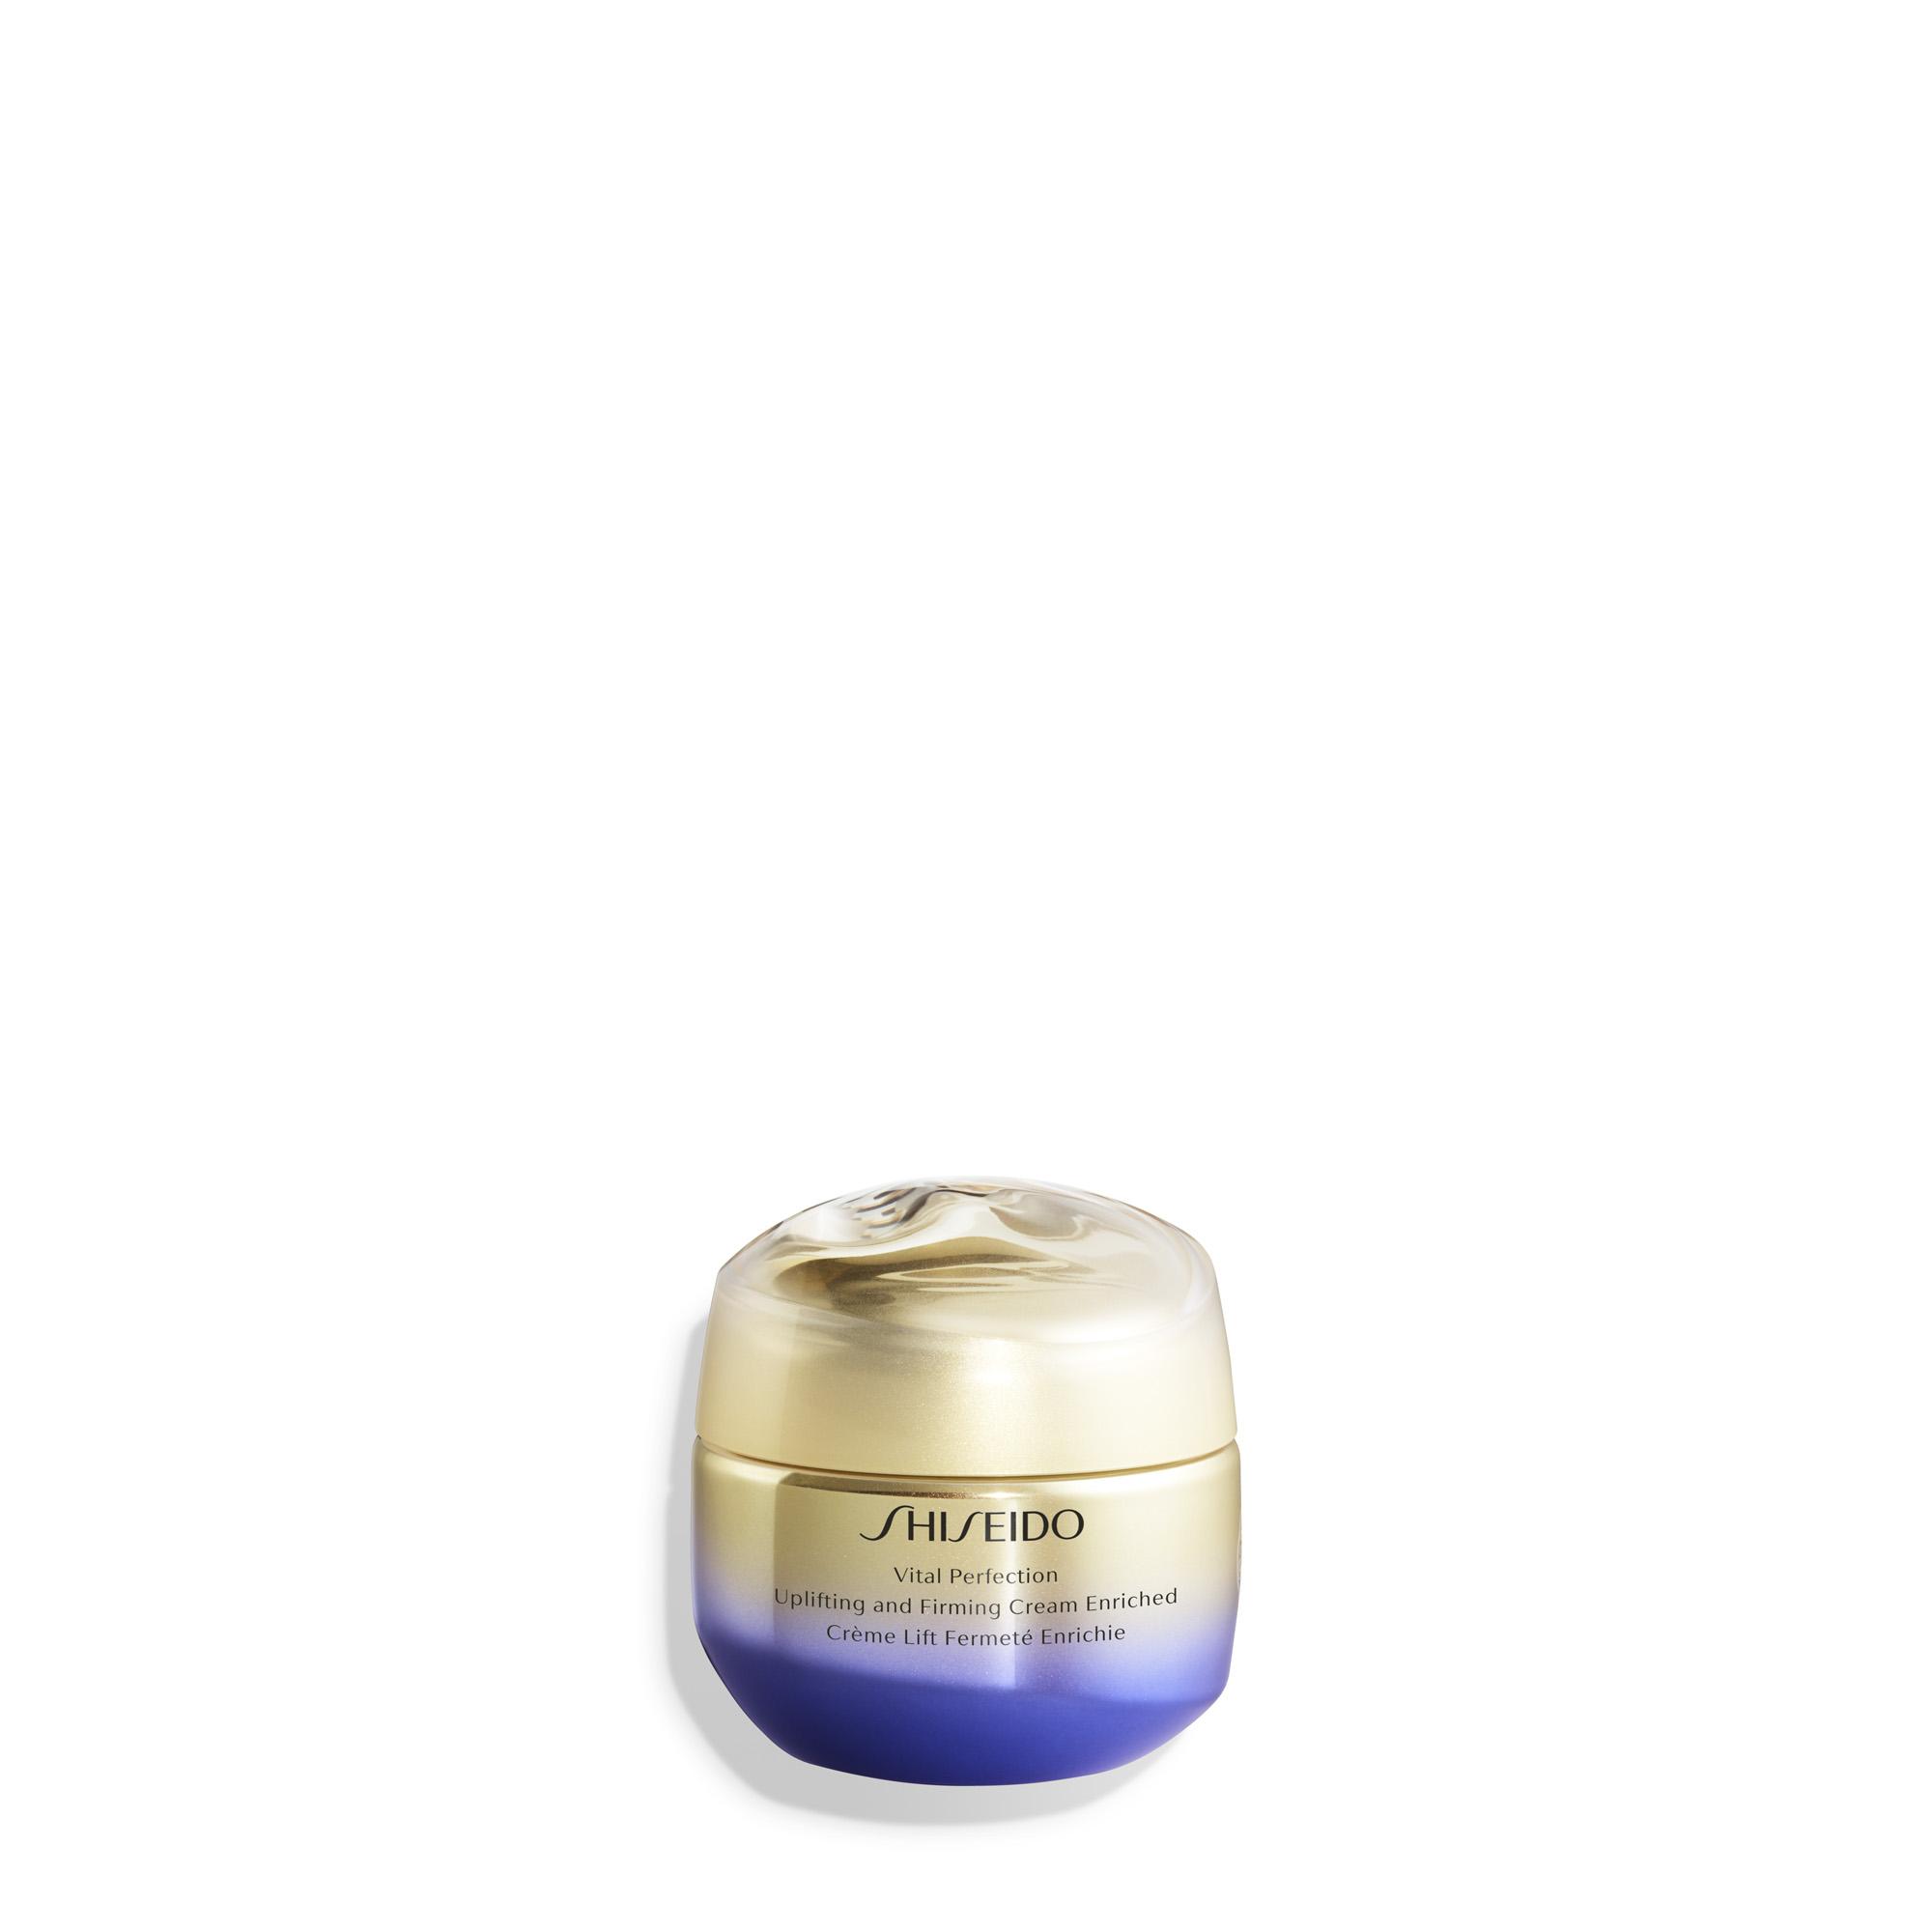 Shiseido Vital Perfection Uplifting and Firming Cream Enriched  50 ml